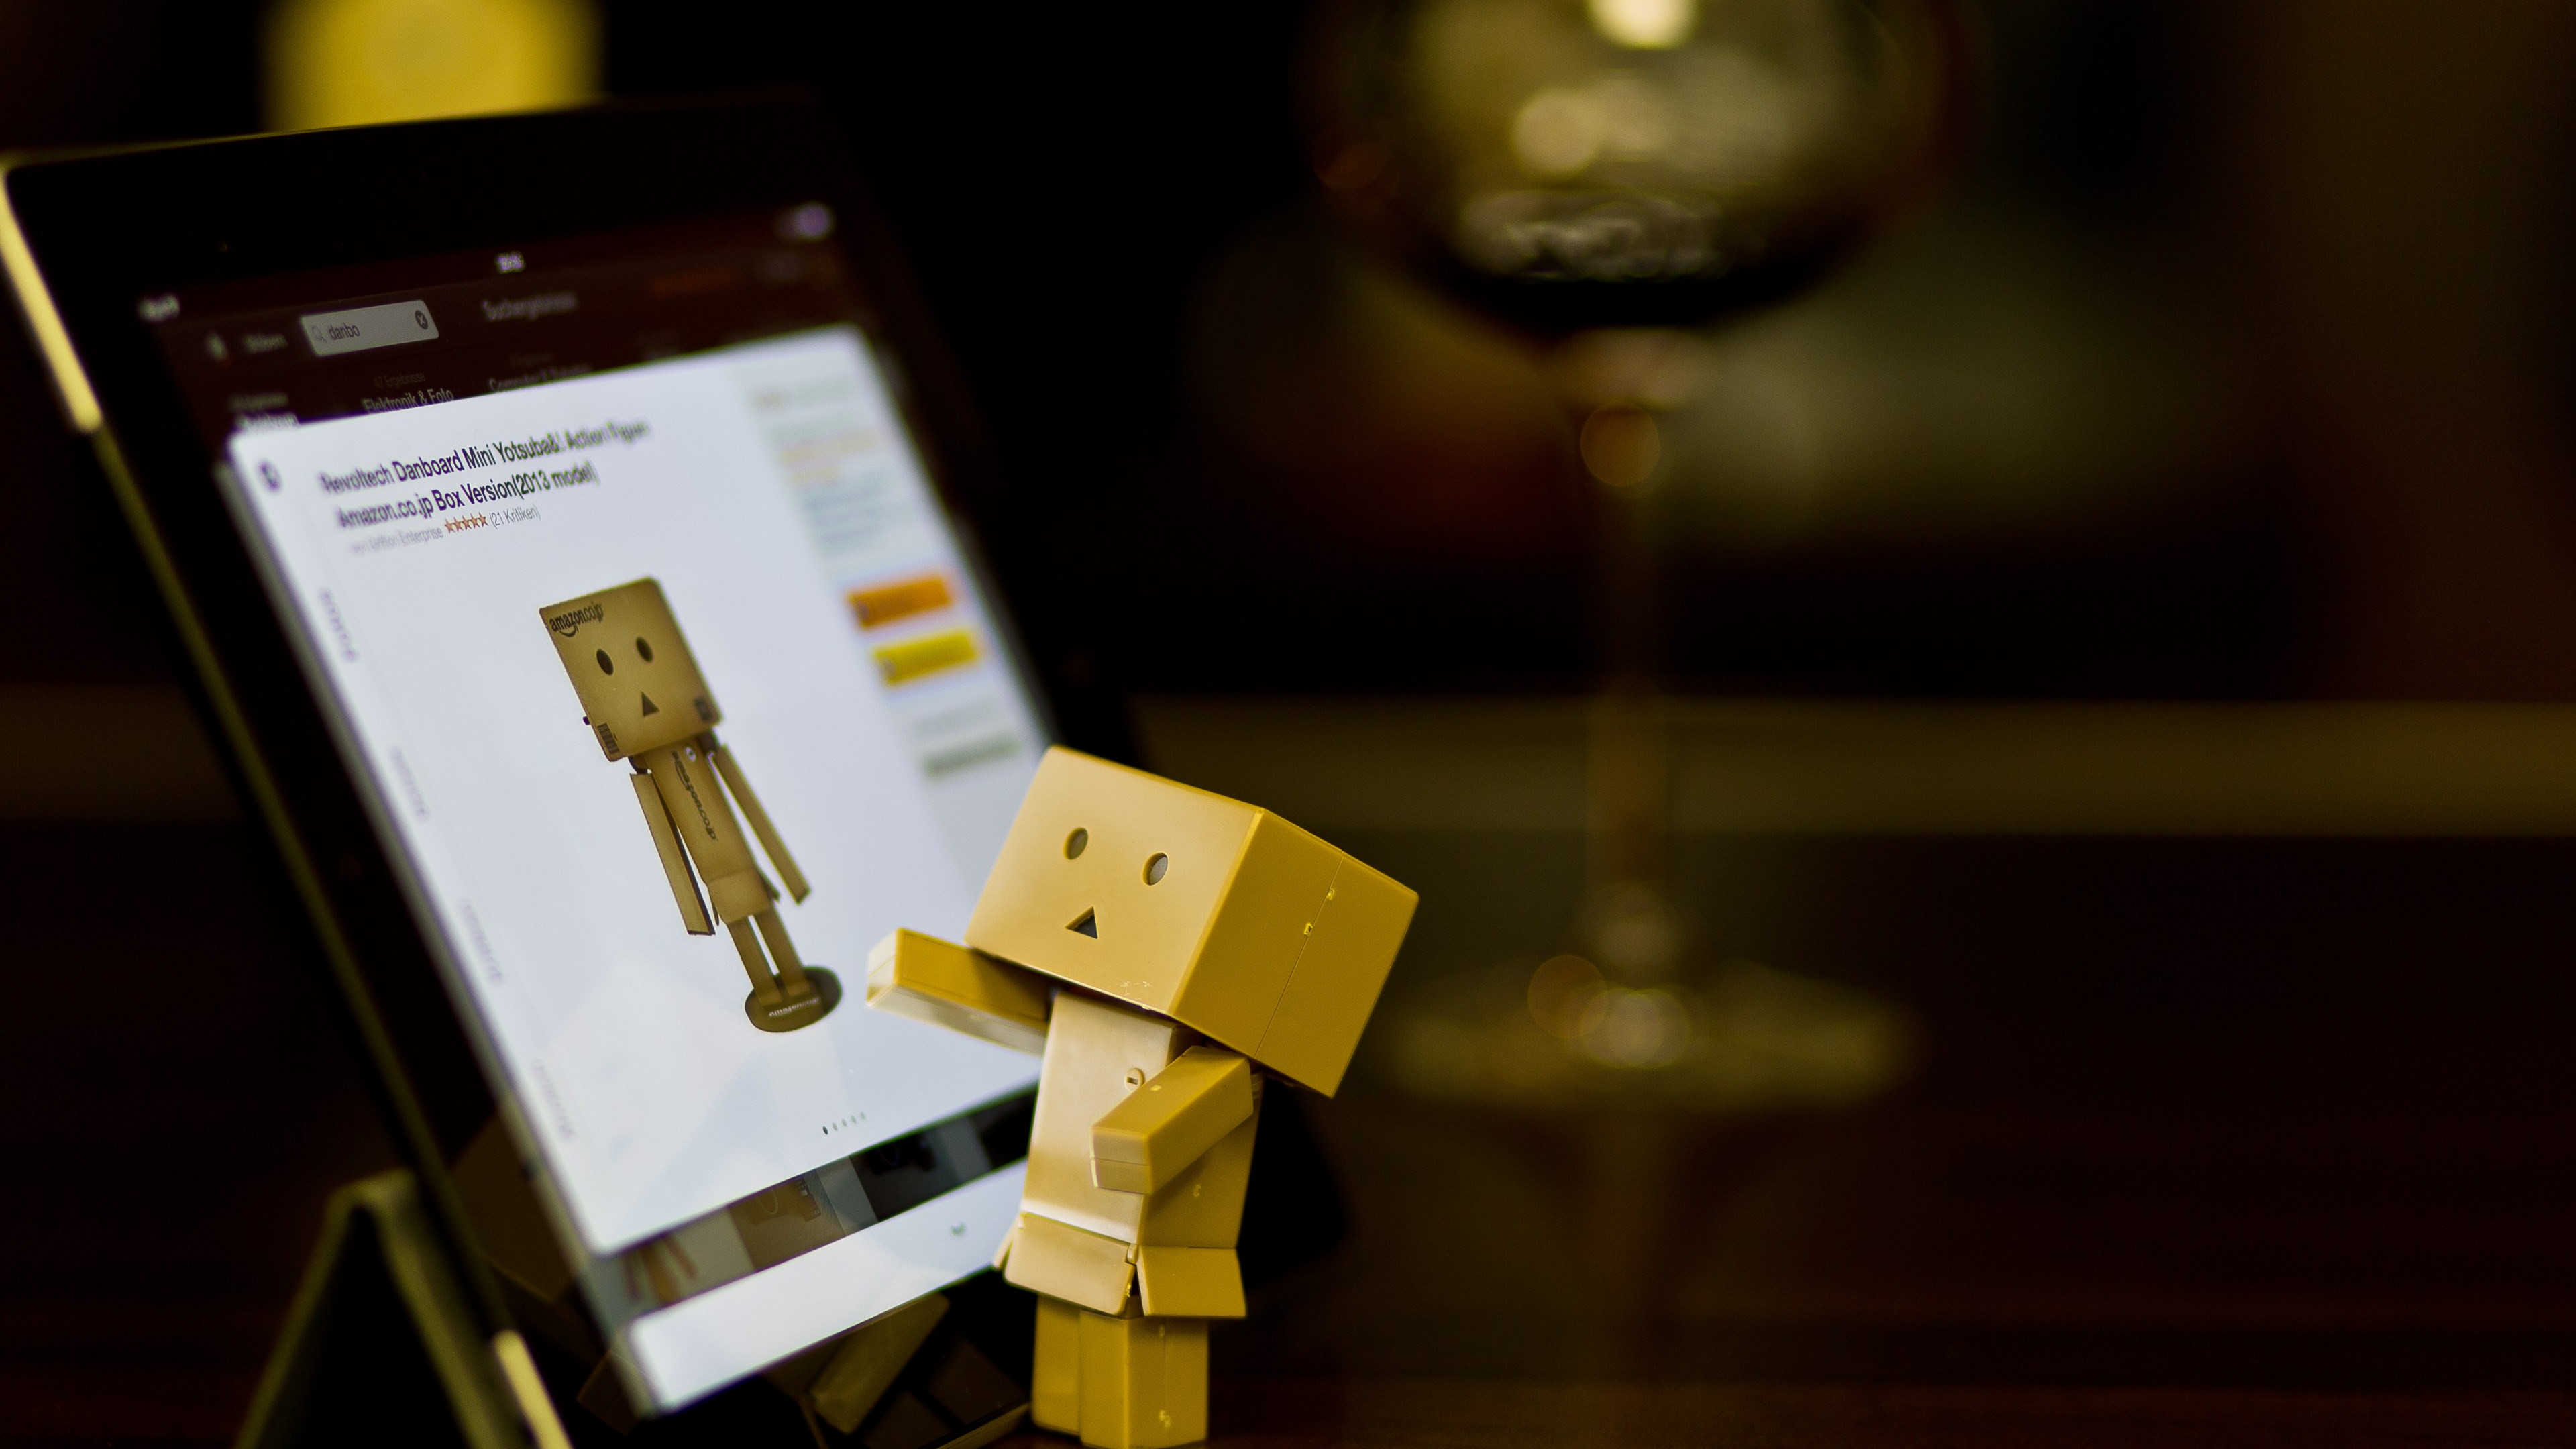 Danbo with tablet wallpaper 3840x2160